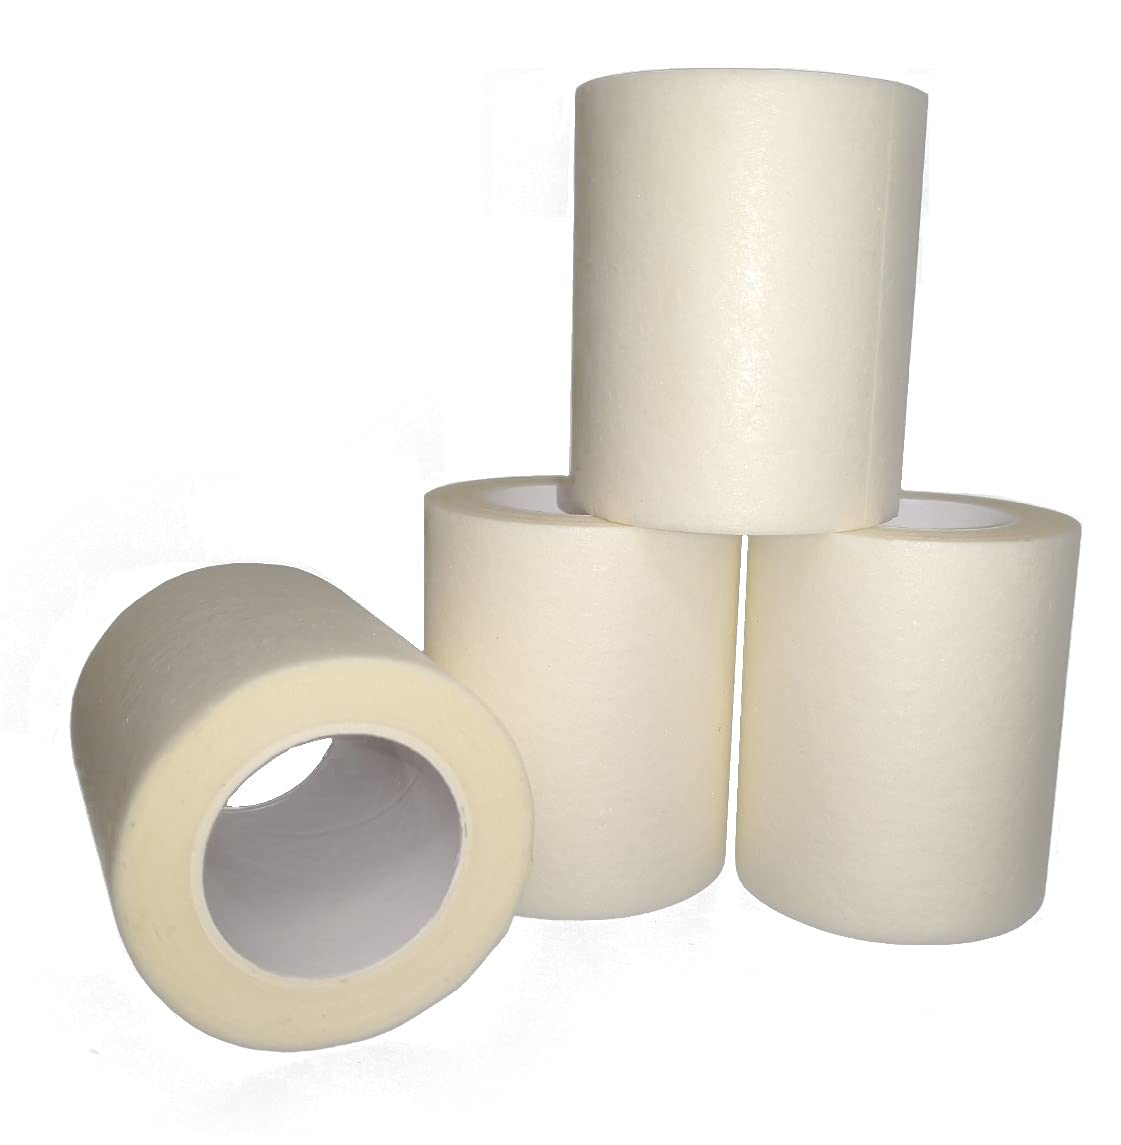 Micropore Surgical Tape White 3 Inches x 10 Yards - 4 Rolls